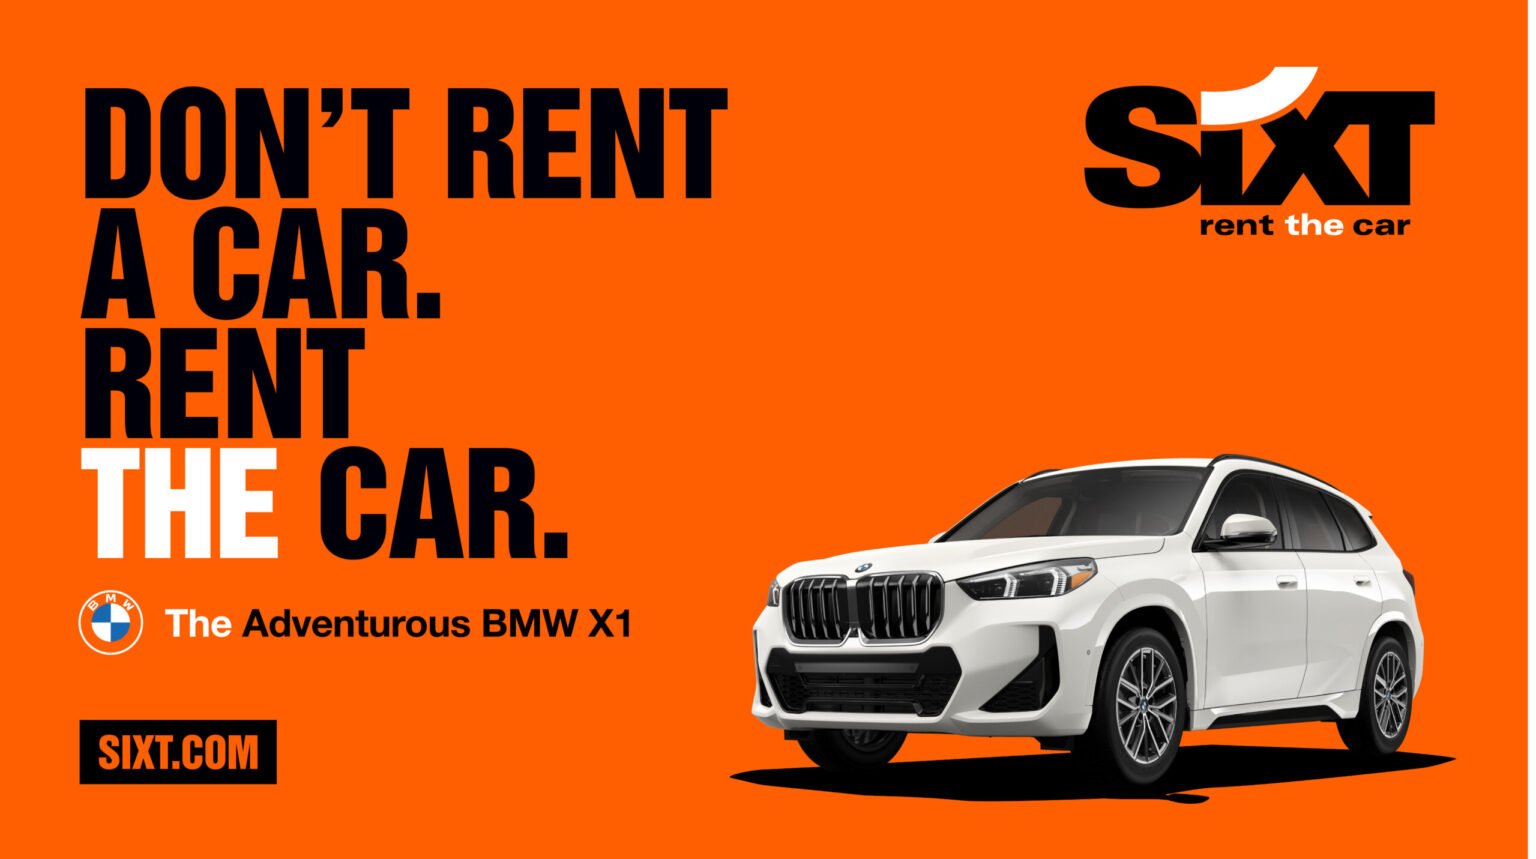 Experience Luxury on Wheels with SIXT Rent a Car